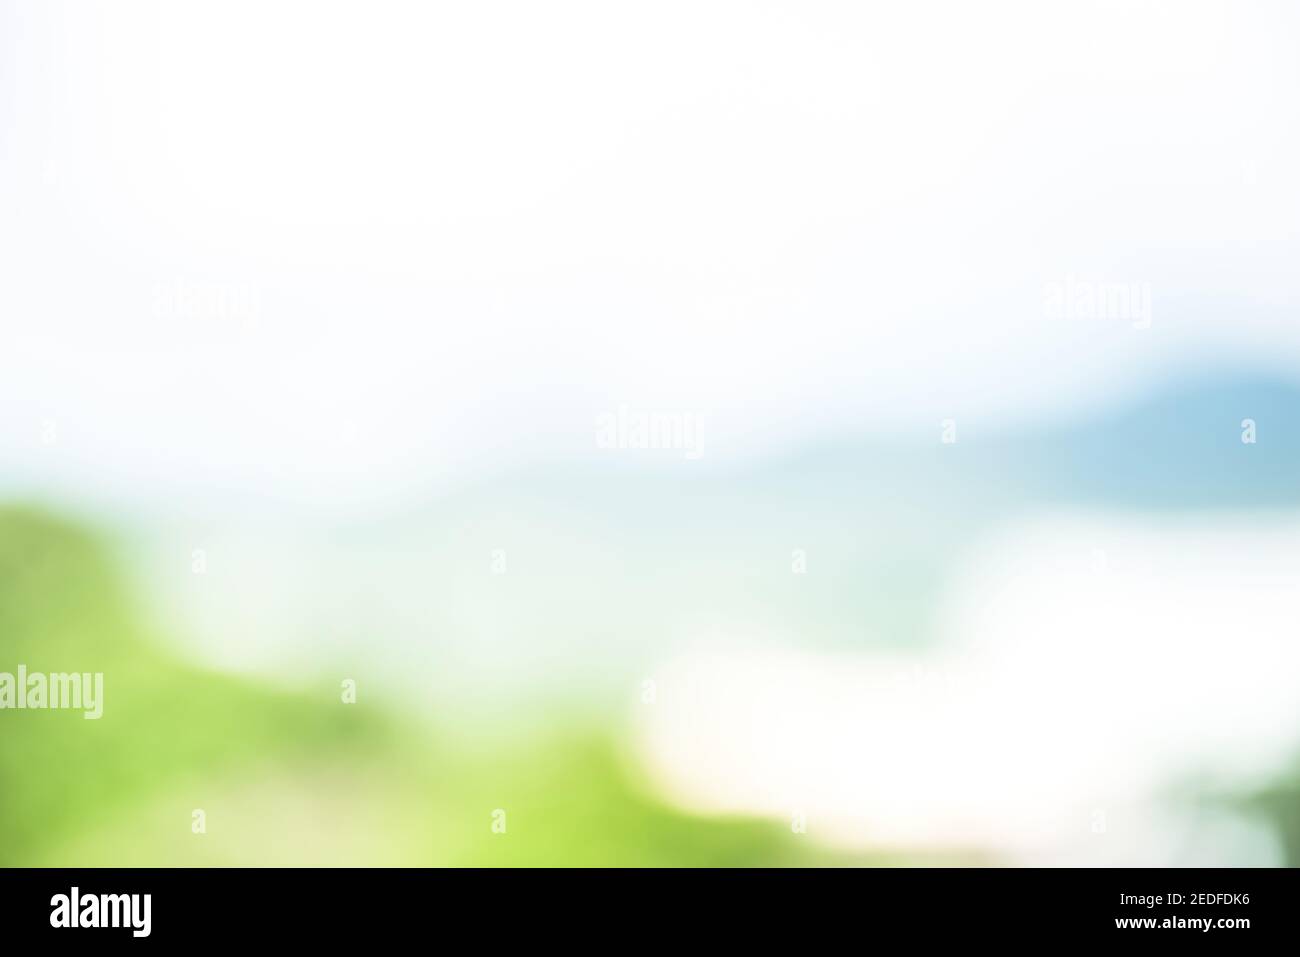 Abstract simple clean natural blur white green bokeh background with light blue shade Stock Photo